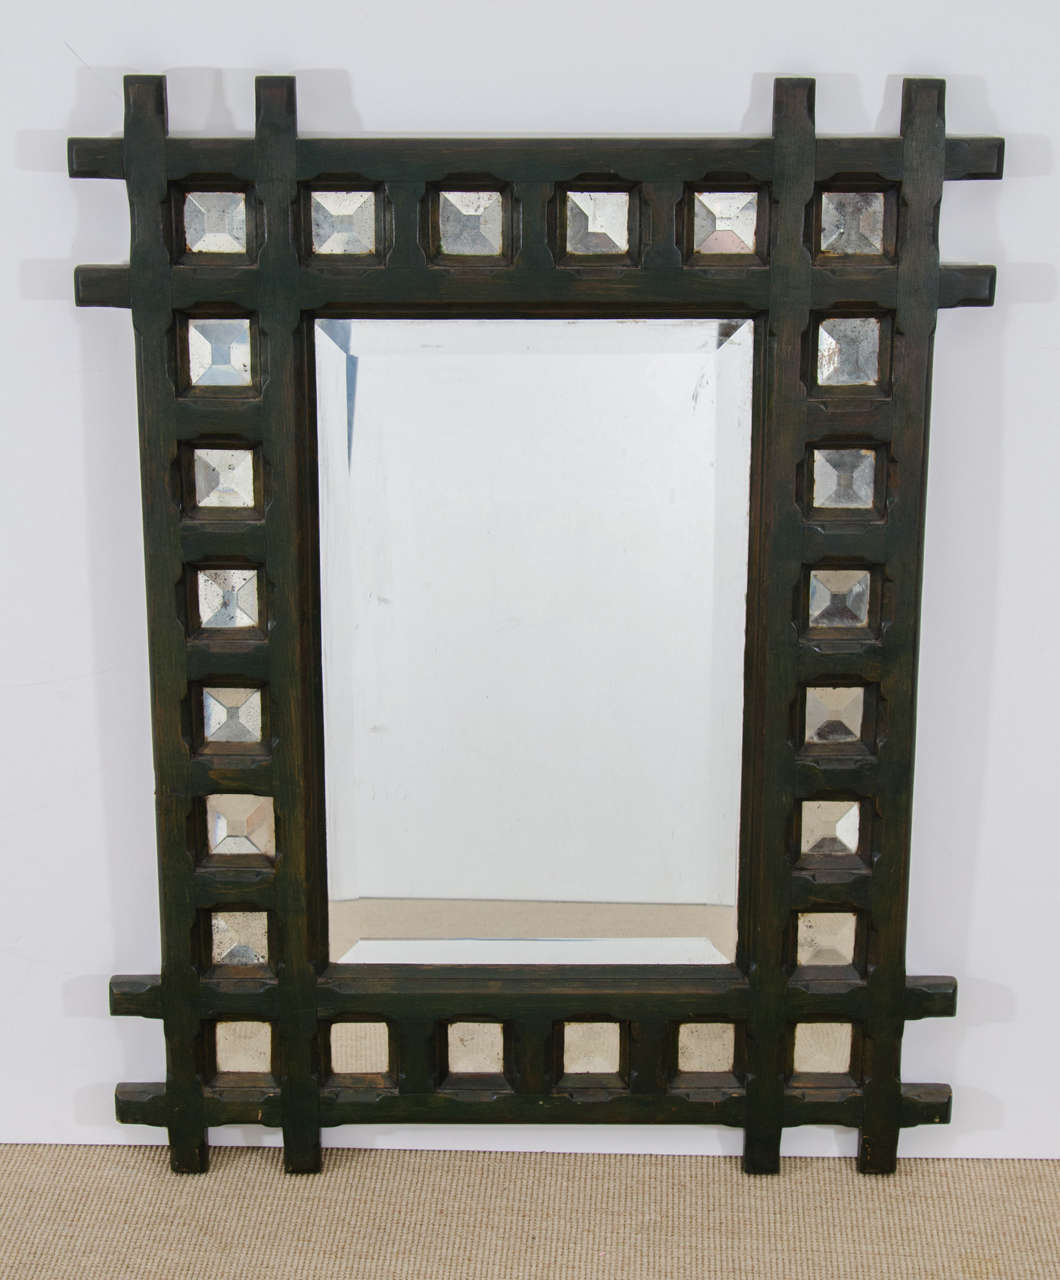 Unusual American Arts & Crafts mirror, circa 1900, original green paint with beautiful aged patina. The mirror is surrounded by smaller bevel cut square mirrors set in a crosshatched wooden frame. Original heavy plank backing. This mirror would add